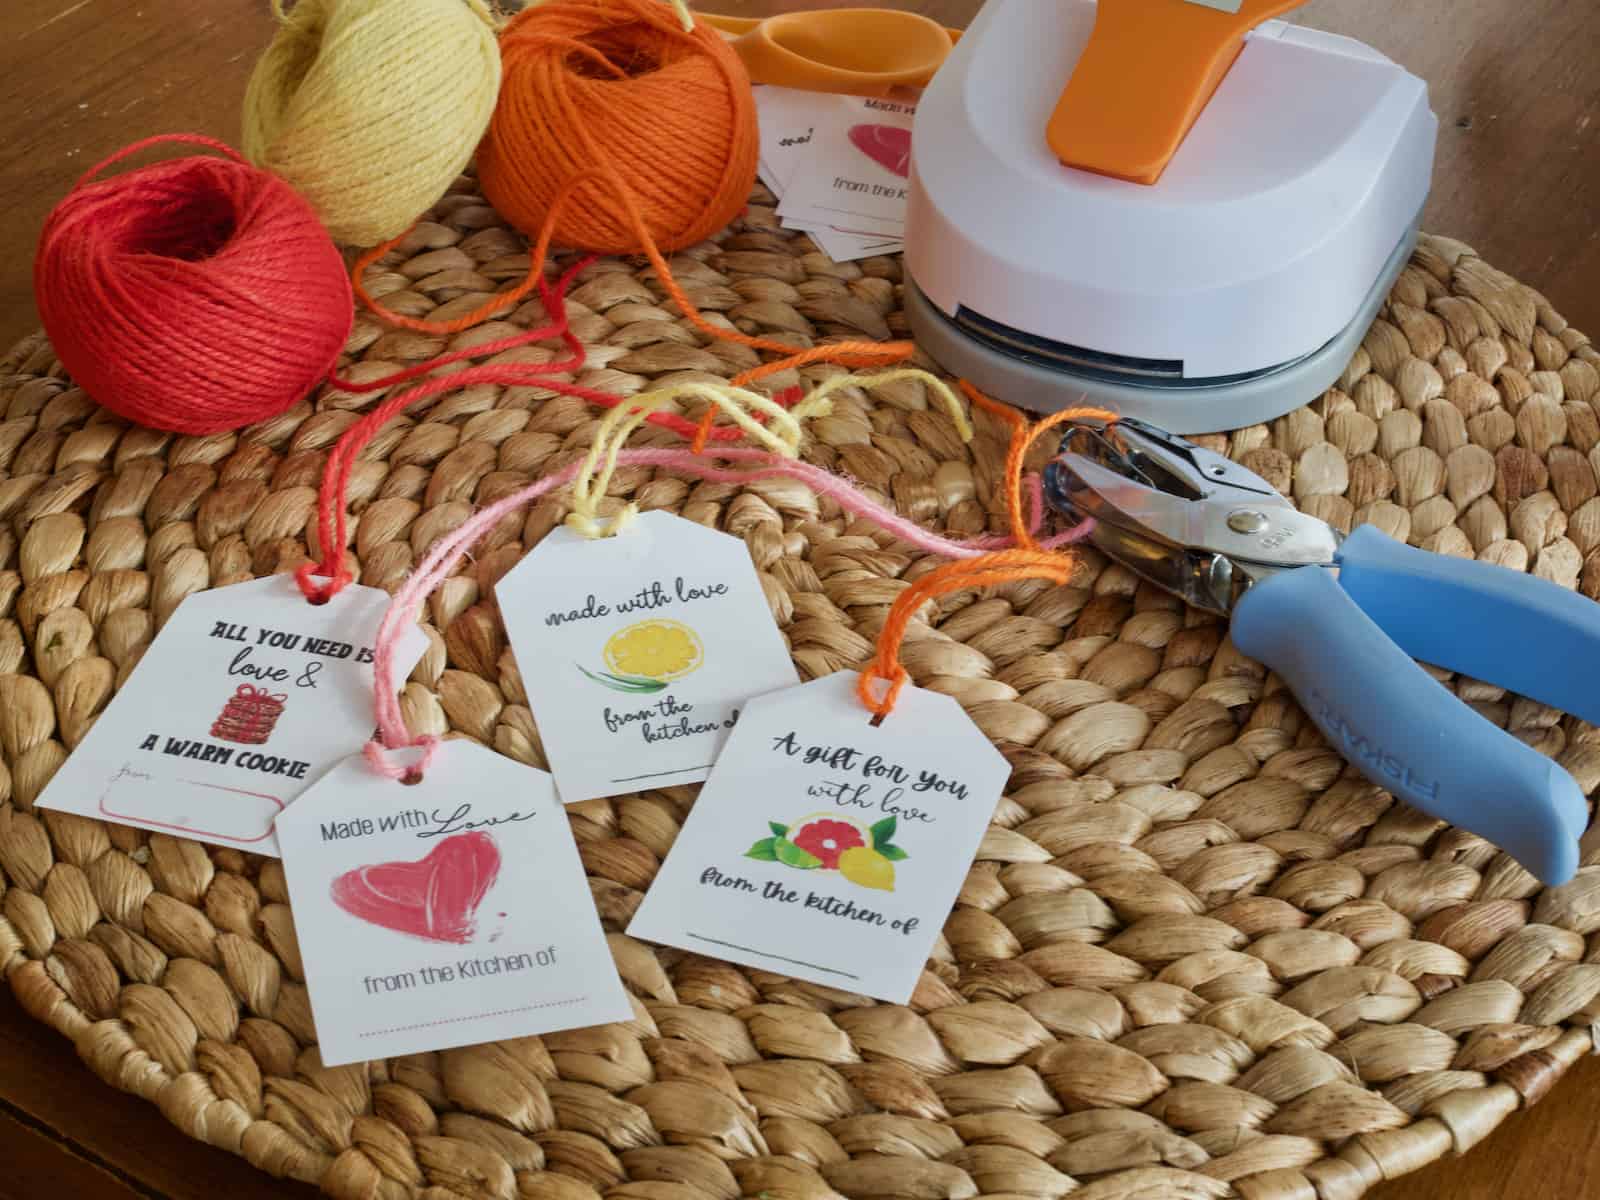 Facebook image of 4 different from the kitchen of gift tags with a space to write your name with colored twin, hole punch and tag punch in background.